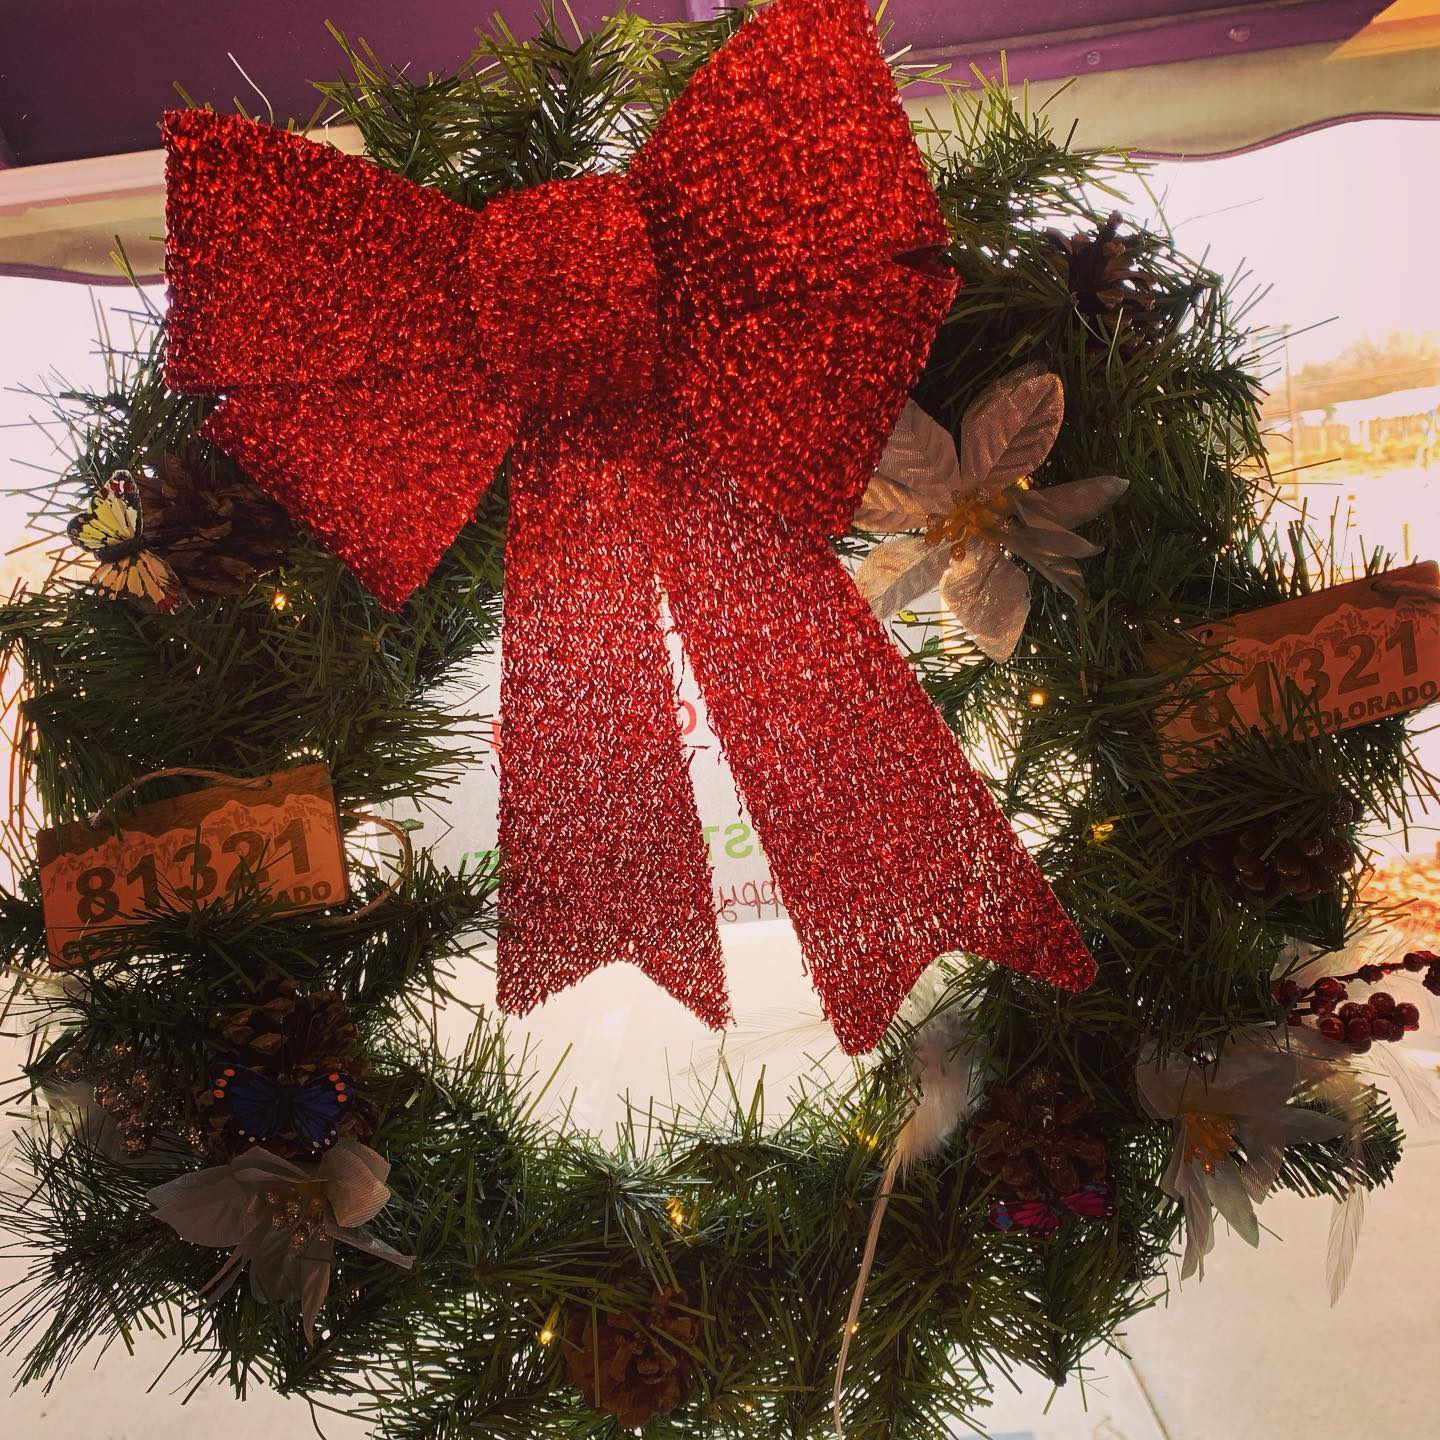 Thank you @shopcortez for wreath, we love it! Don’t forget to shop local this holiday season! #getdoobifiedresponsibly #cortezcolorado